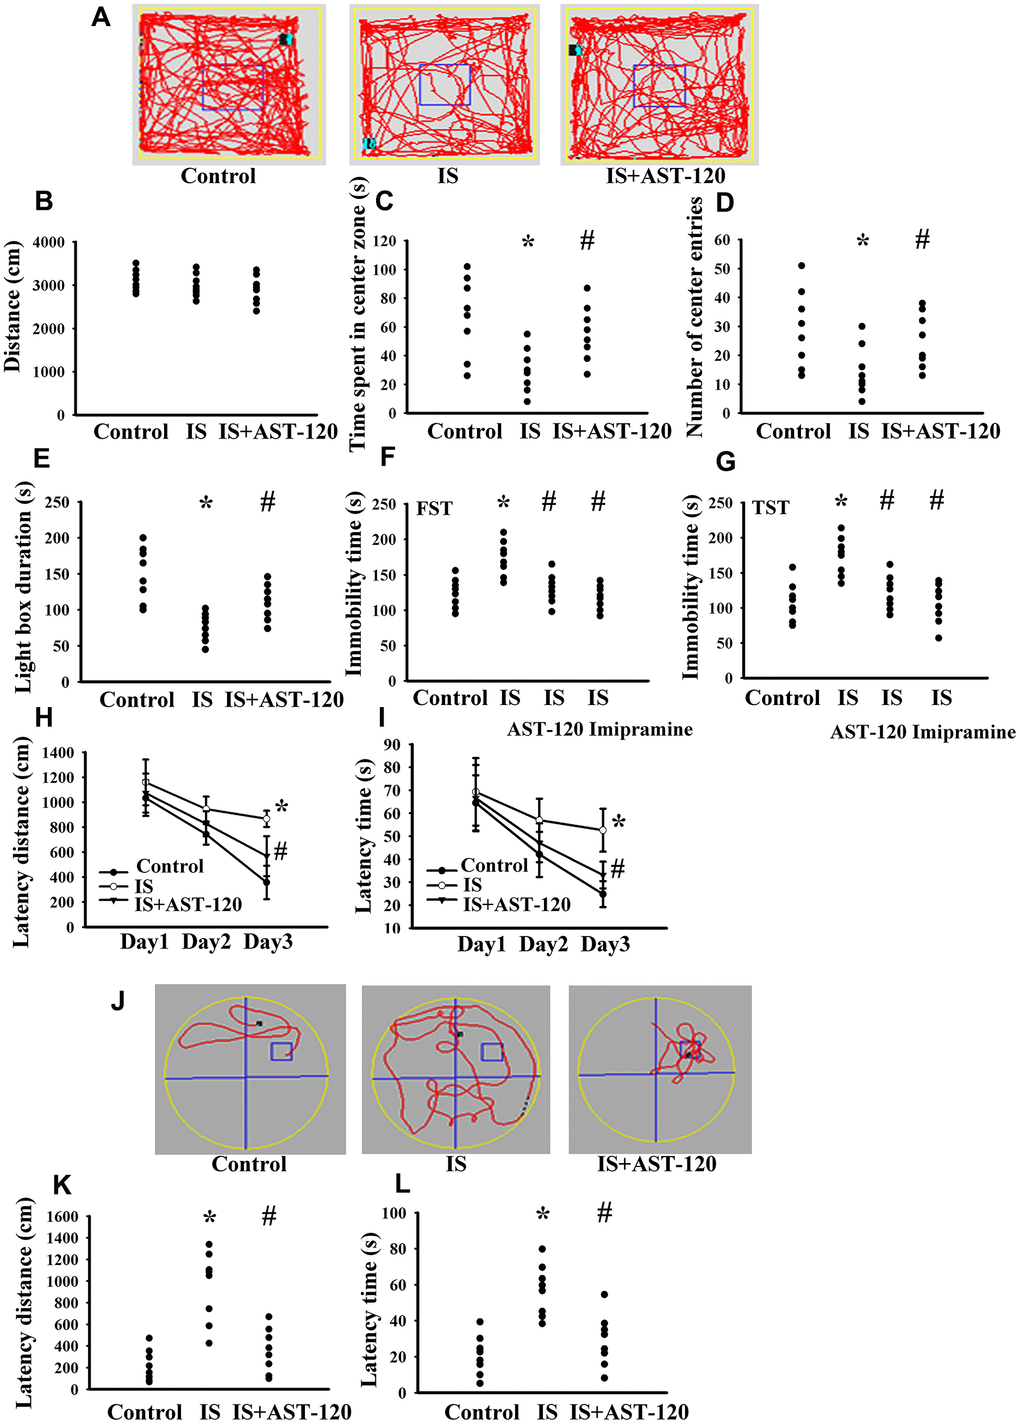 Indoxyl sulfate caused behavioral alterations. Unilateral nephrectomized mice were intraperitoneally injected with indoxyl sulfate (IS, 0 and 100 mg/kg) and the indoxyl sulfate-injected mice were orally given with AST-120 (0 and 400 mg/kg) for 7 weeks. The tracking paths (A), distance in movement of spontaneous locomotor activity (B), time spent in the center zone (C), and numbers of center zone entries (D) were evaluated by the Open Field Test. The duration of light preference was evaluated by the Light-Dark Box Test (E). The FST was conducted for a period of 5 min and the duration of immobility was recorded (F). The TST was performed for a period of 6 min and the duration of immobility was recorded (G). Antidepressant imipramine (20 mg/kg) was intraperitoneally administrated 1 h prior to the FST (F) and TST (G). In the Morris Water Maze Test, the escape distance (H) and escape time (I) in the acquisition phase were recorded from 1st to 3rd days. After training for 3 consecutive days, the swimming routes (J), escape distance (K), and escape time (L) required to reach the hidden platform were recorded. *p 